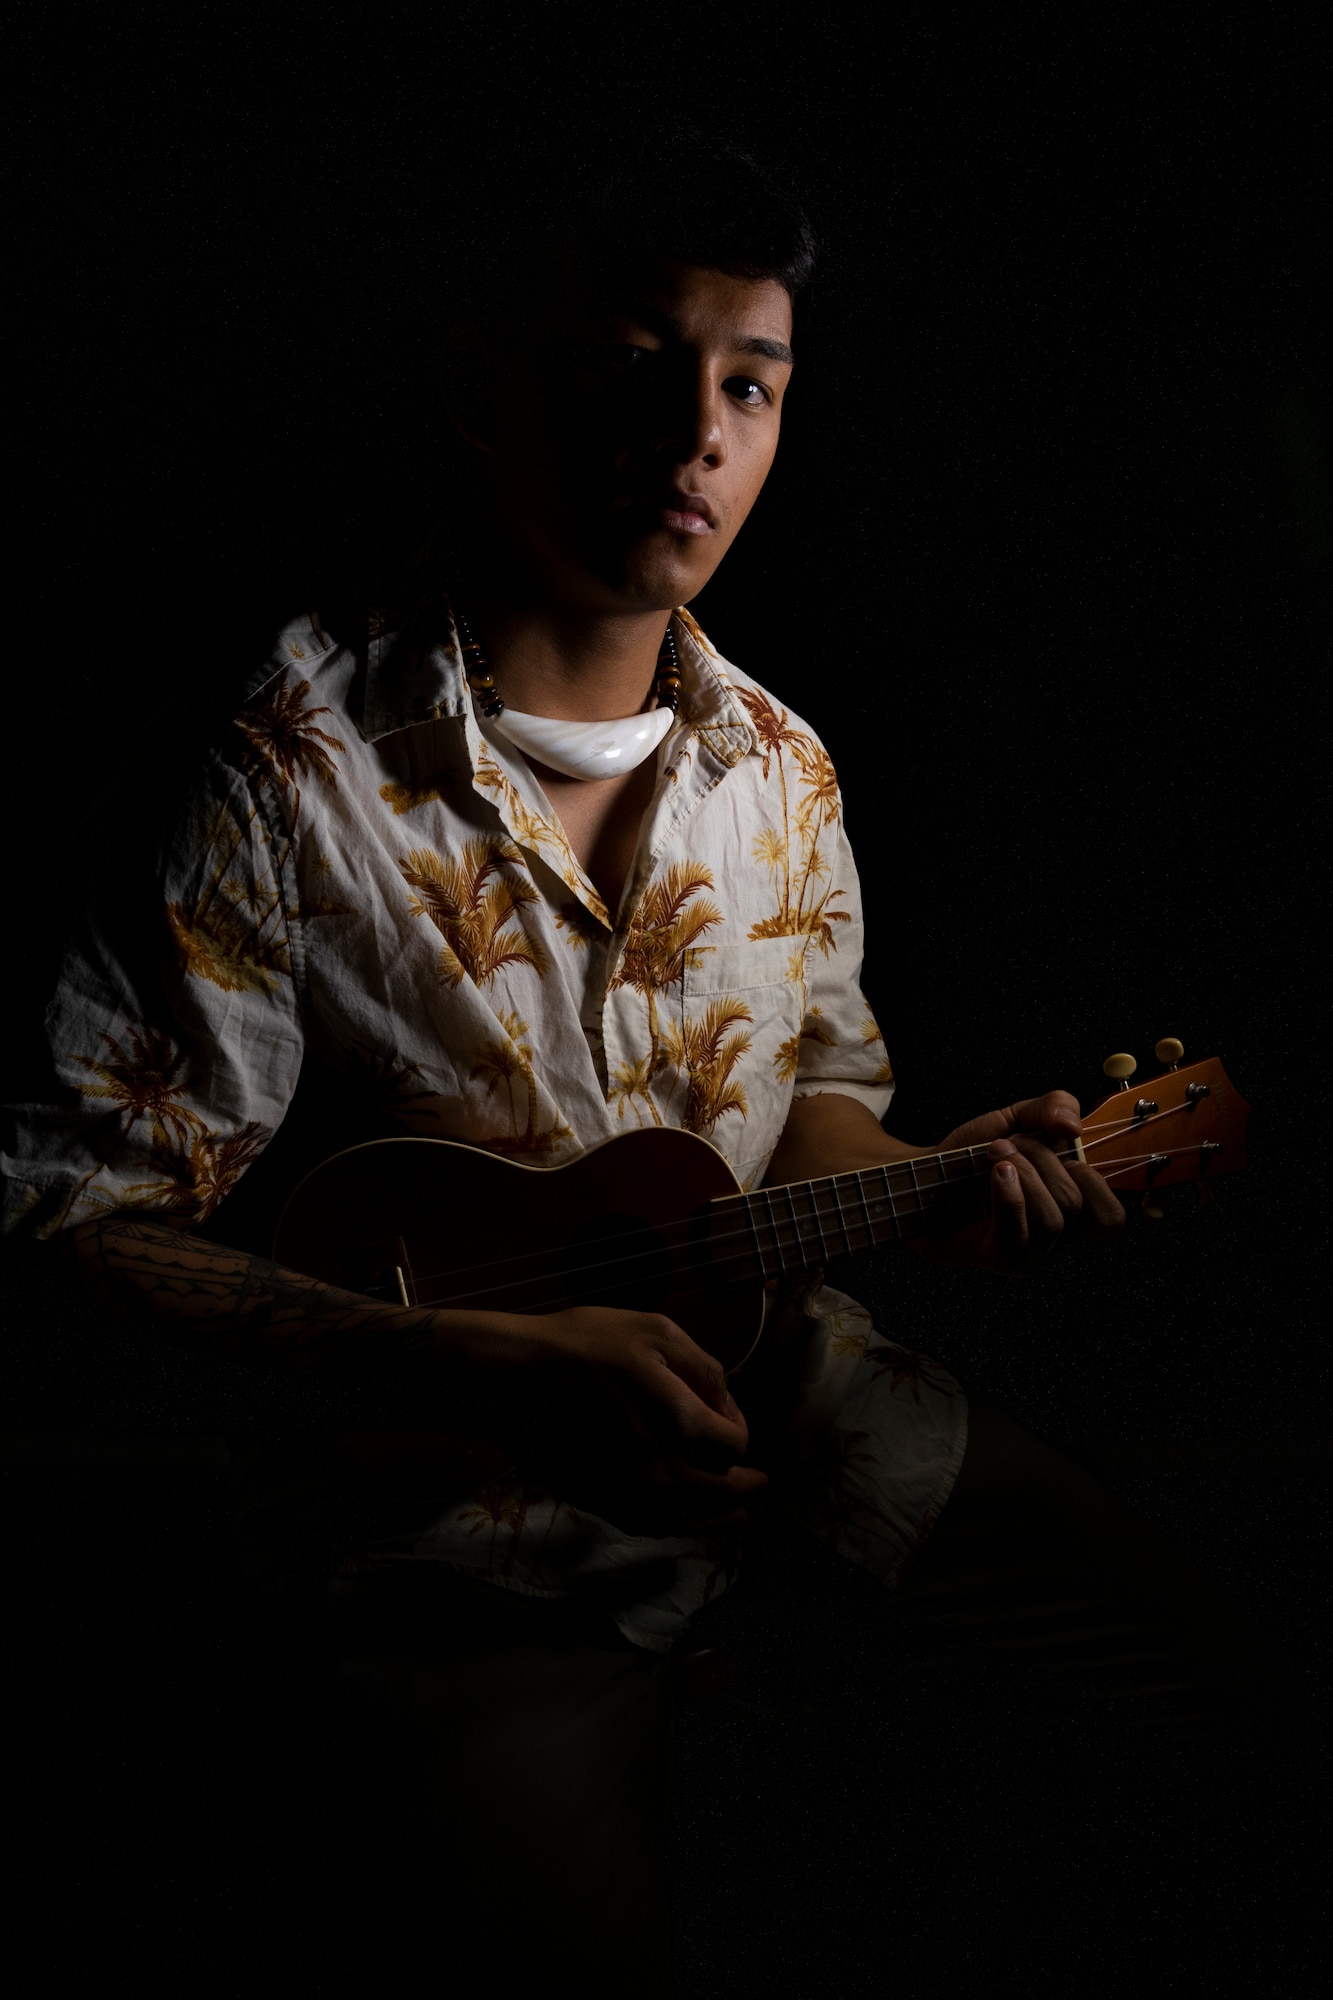 A young man playing the ukulele